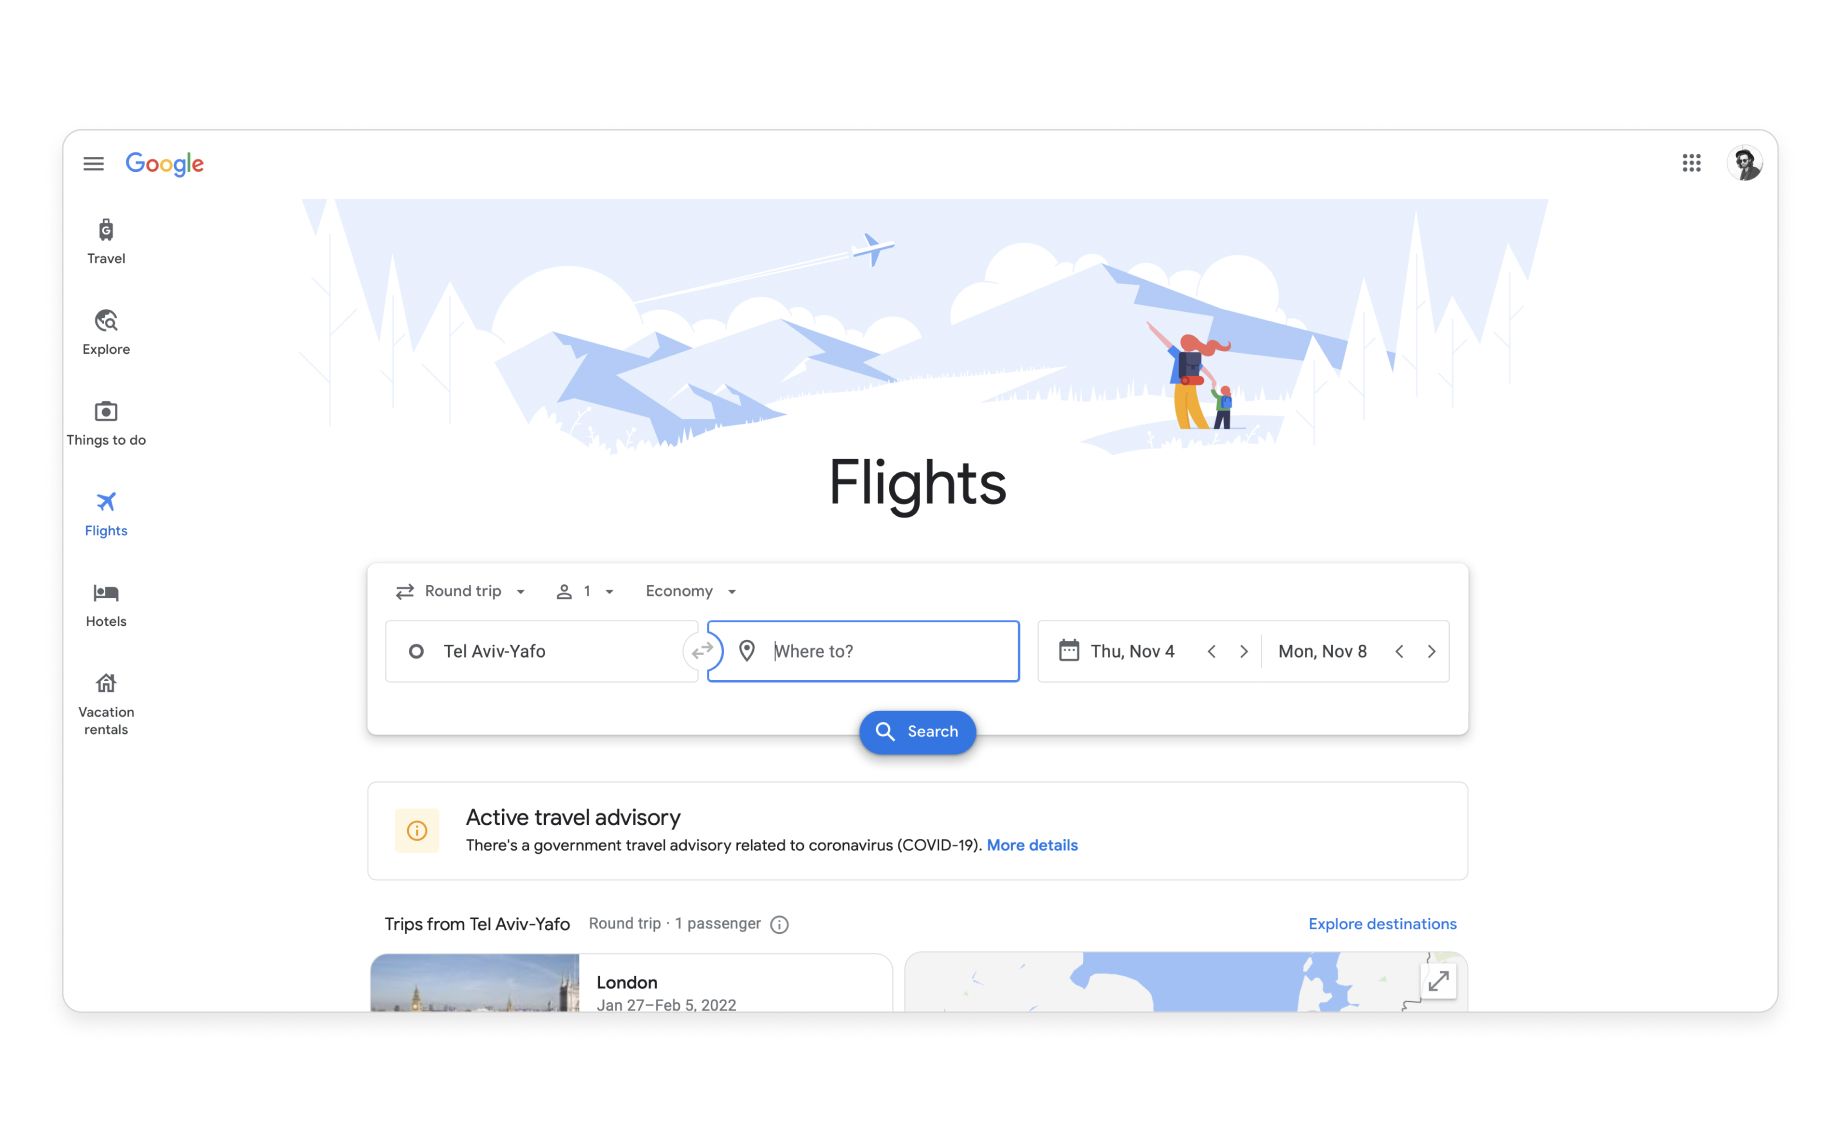 Google perfected Material Design by applying the system to its own products (Google Flights)